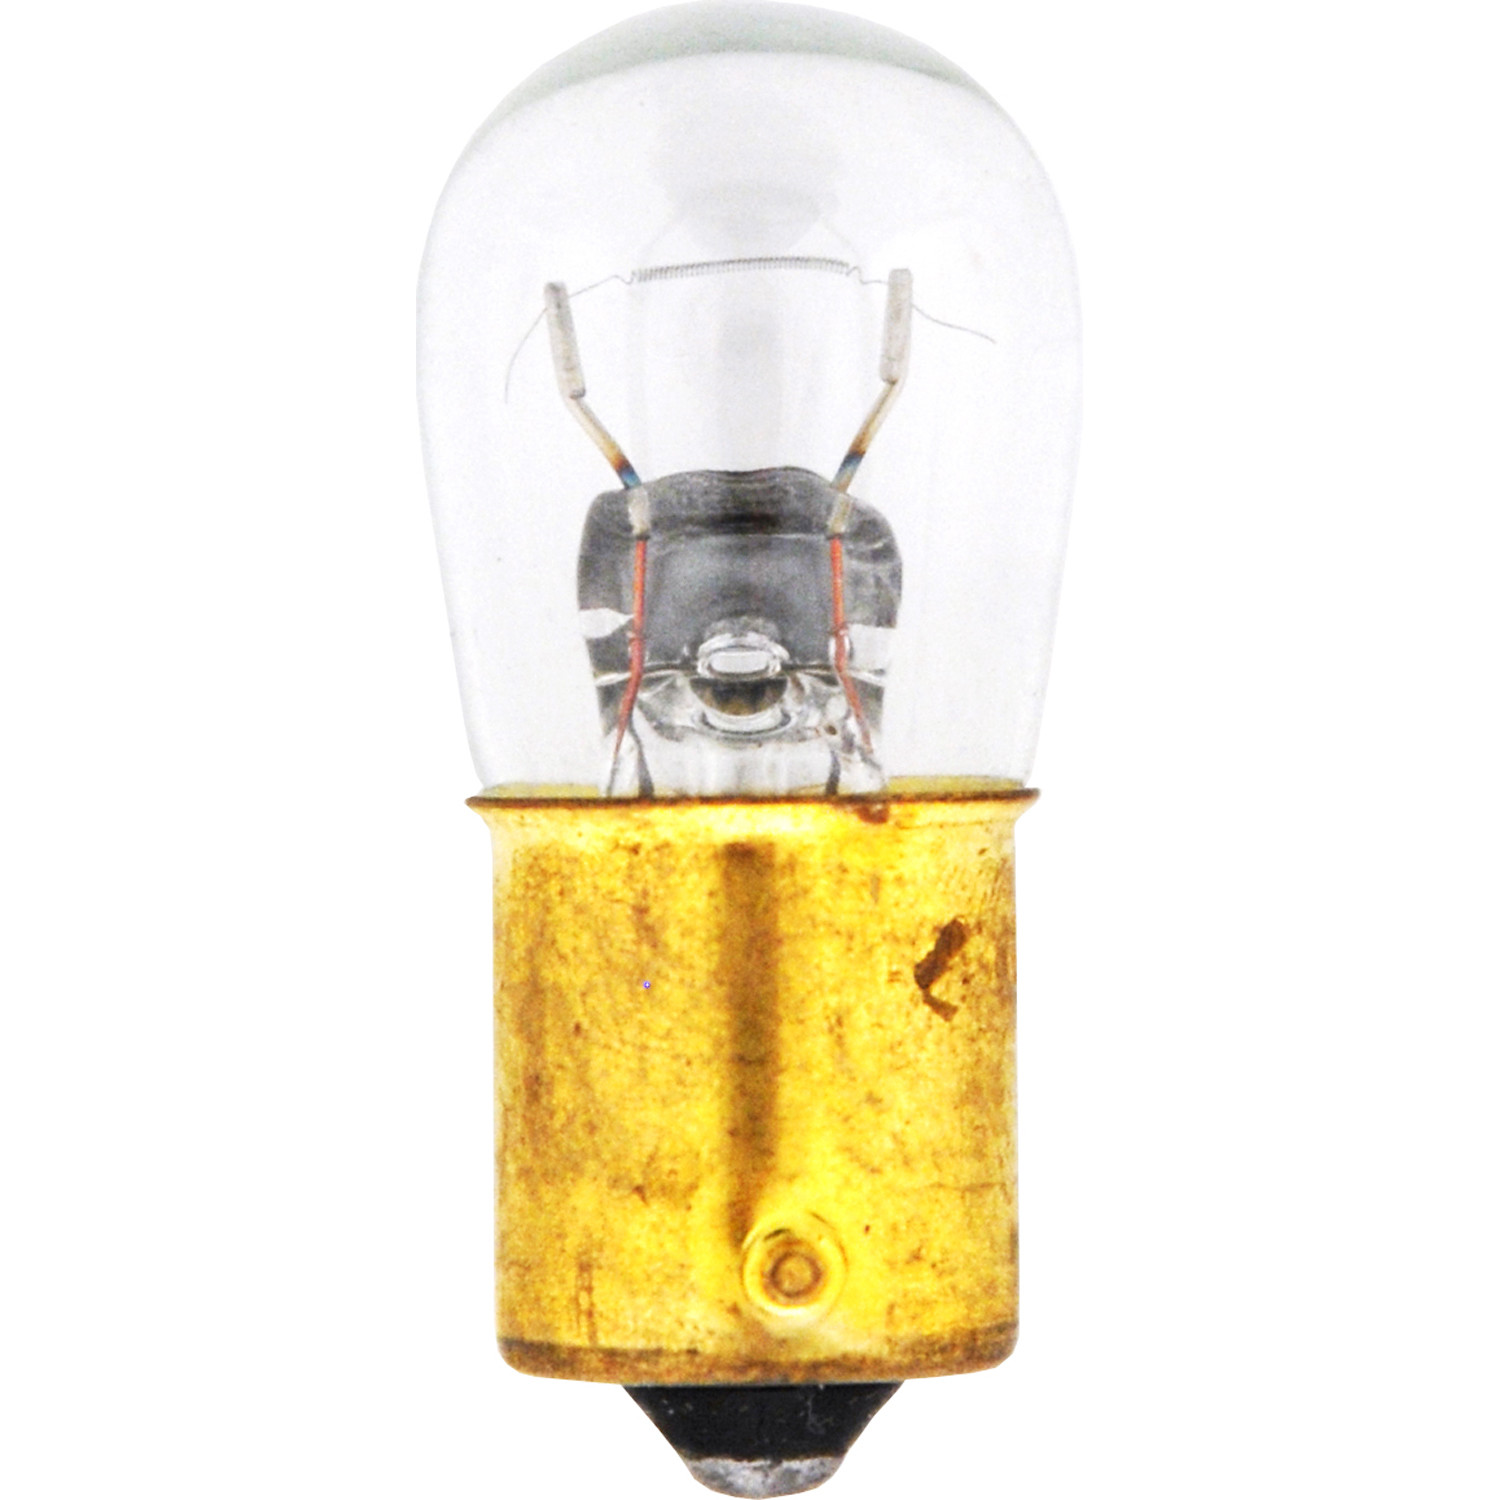 SYLVANIA RETAIL PACKS - Blister Pack Twin Engine Compartment Light Bulb - SYR 1004.BP2